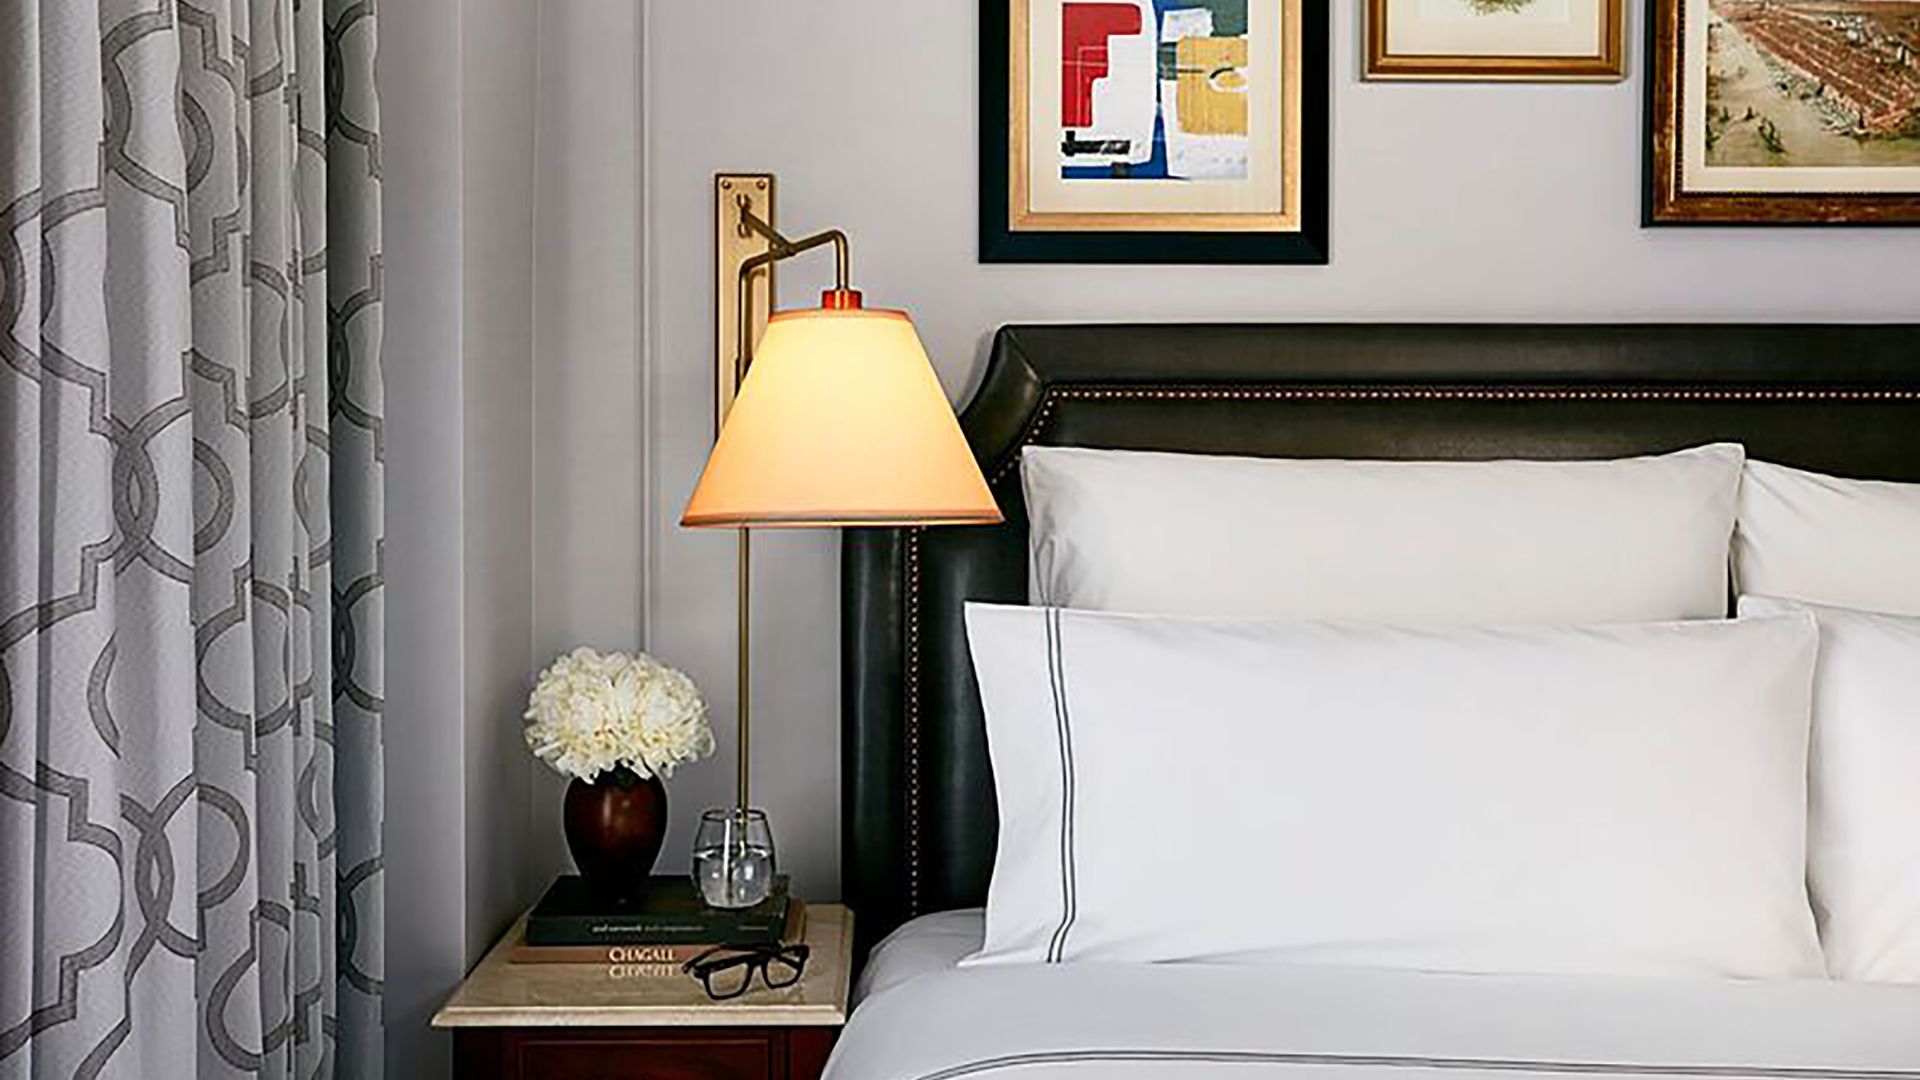 A Bed With A Lamp And A Lamp On The Side